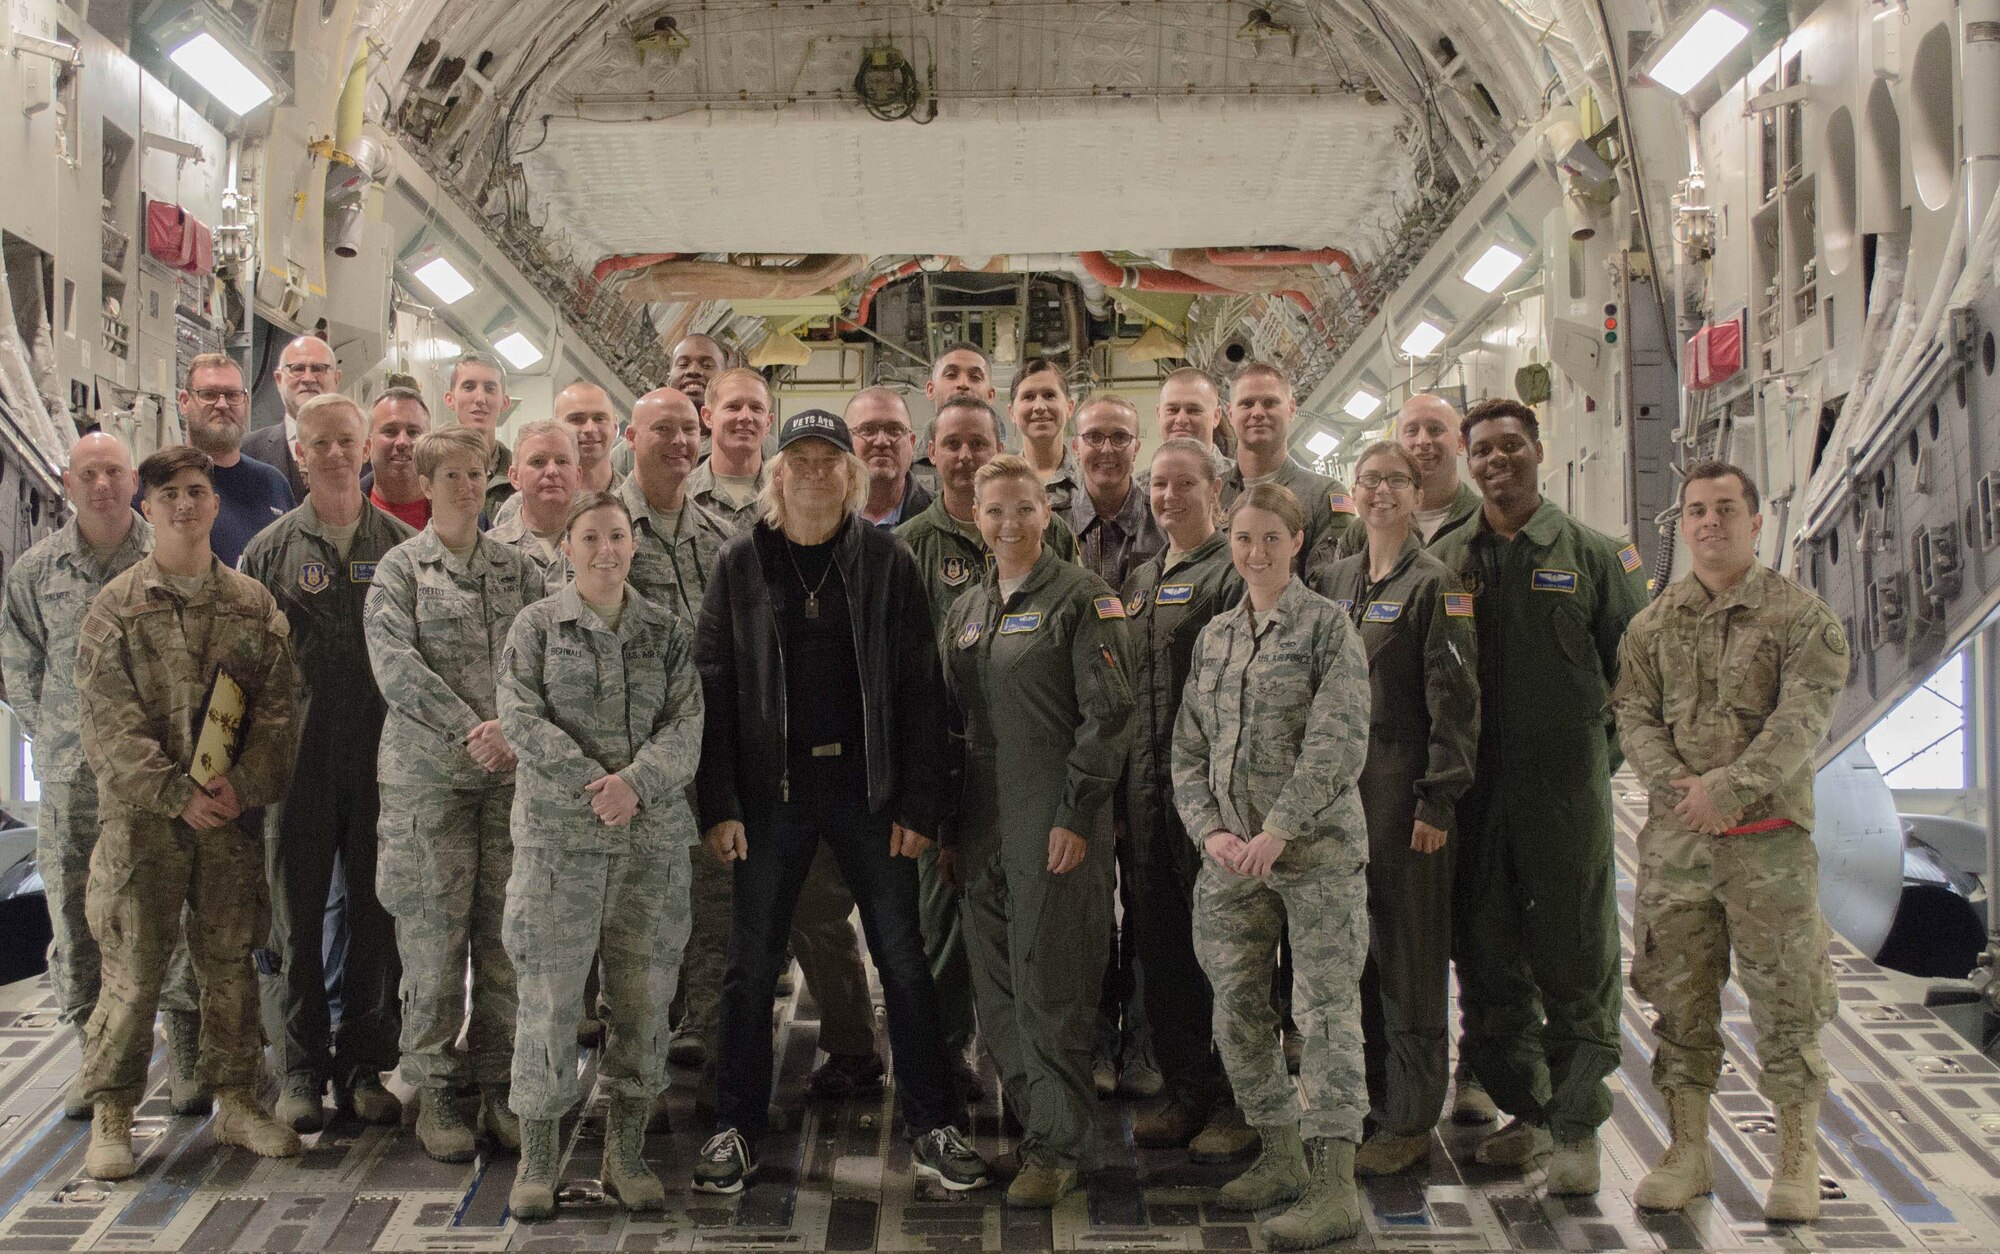 Personnel assigned to Joint Base Lewis-McChord, Wash., pose for a photograph with iconic rock n’ roll musician Joe Walsh Nov. 7, 2018. Walsh was in the area for a concert benefiting military veterans. (U.S. Air Force photo by Senior Master Sgt. Sherri Nordin)